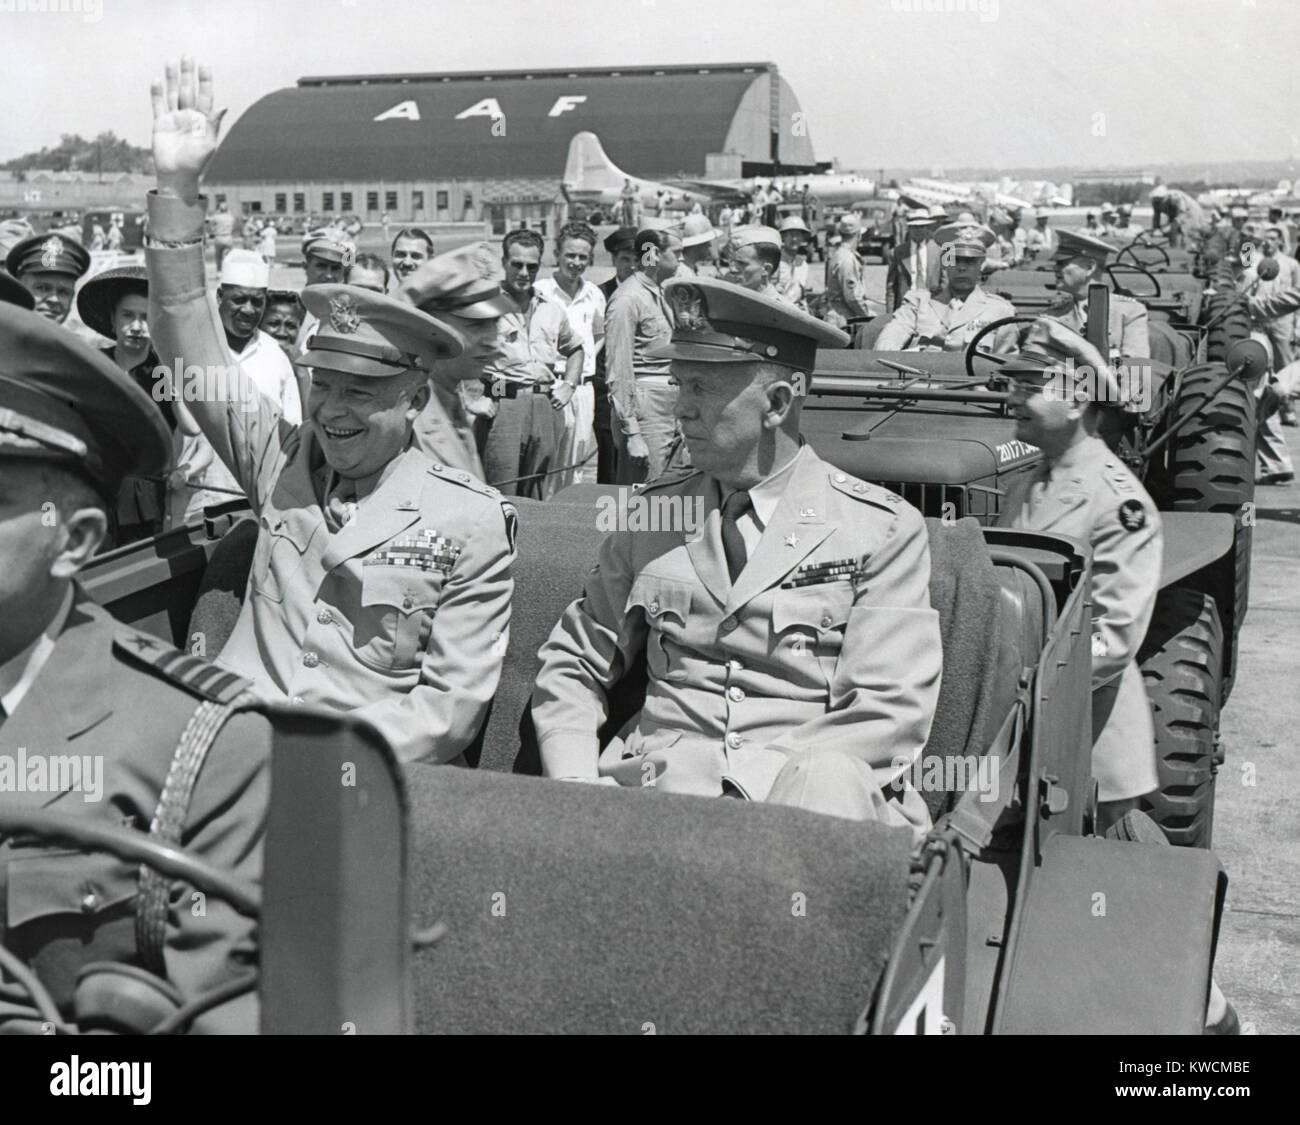 Generals Dwight Eisenhower and George Marshall sitting in a jeep at a Washington D.C. airport. Eisenhower is waving and smiling, contrasting with the restrained Marshall. June 18, 1945. - (BSLOC 2014 15 117) Stock Photo